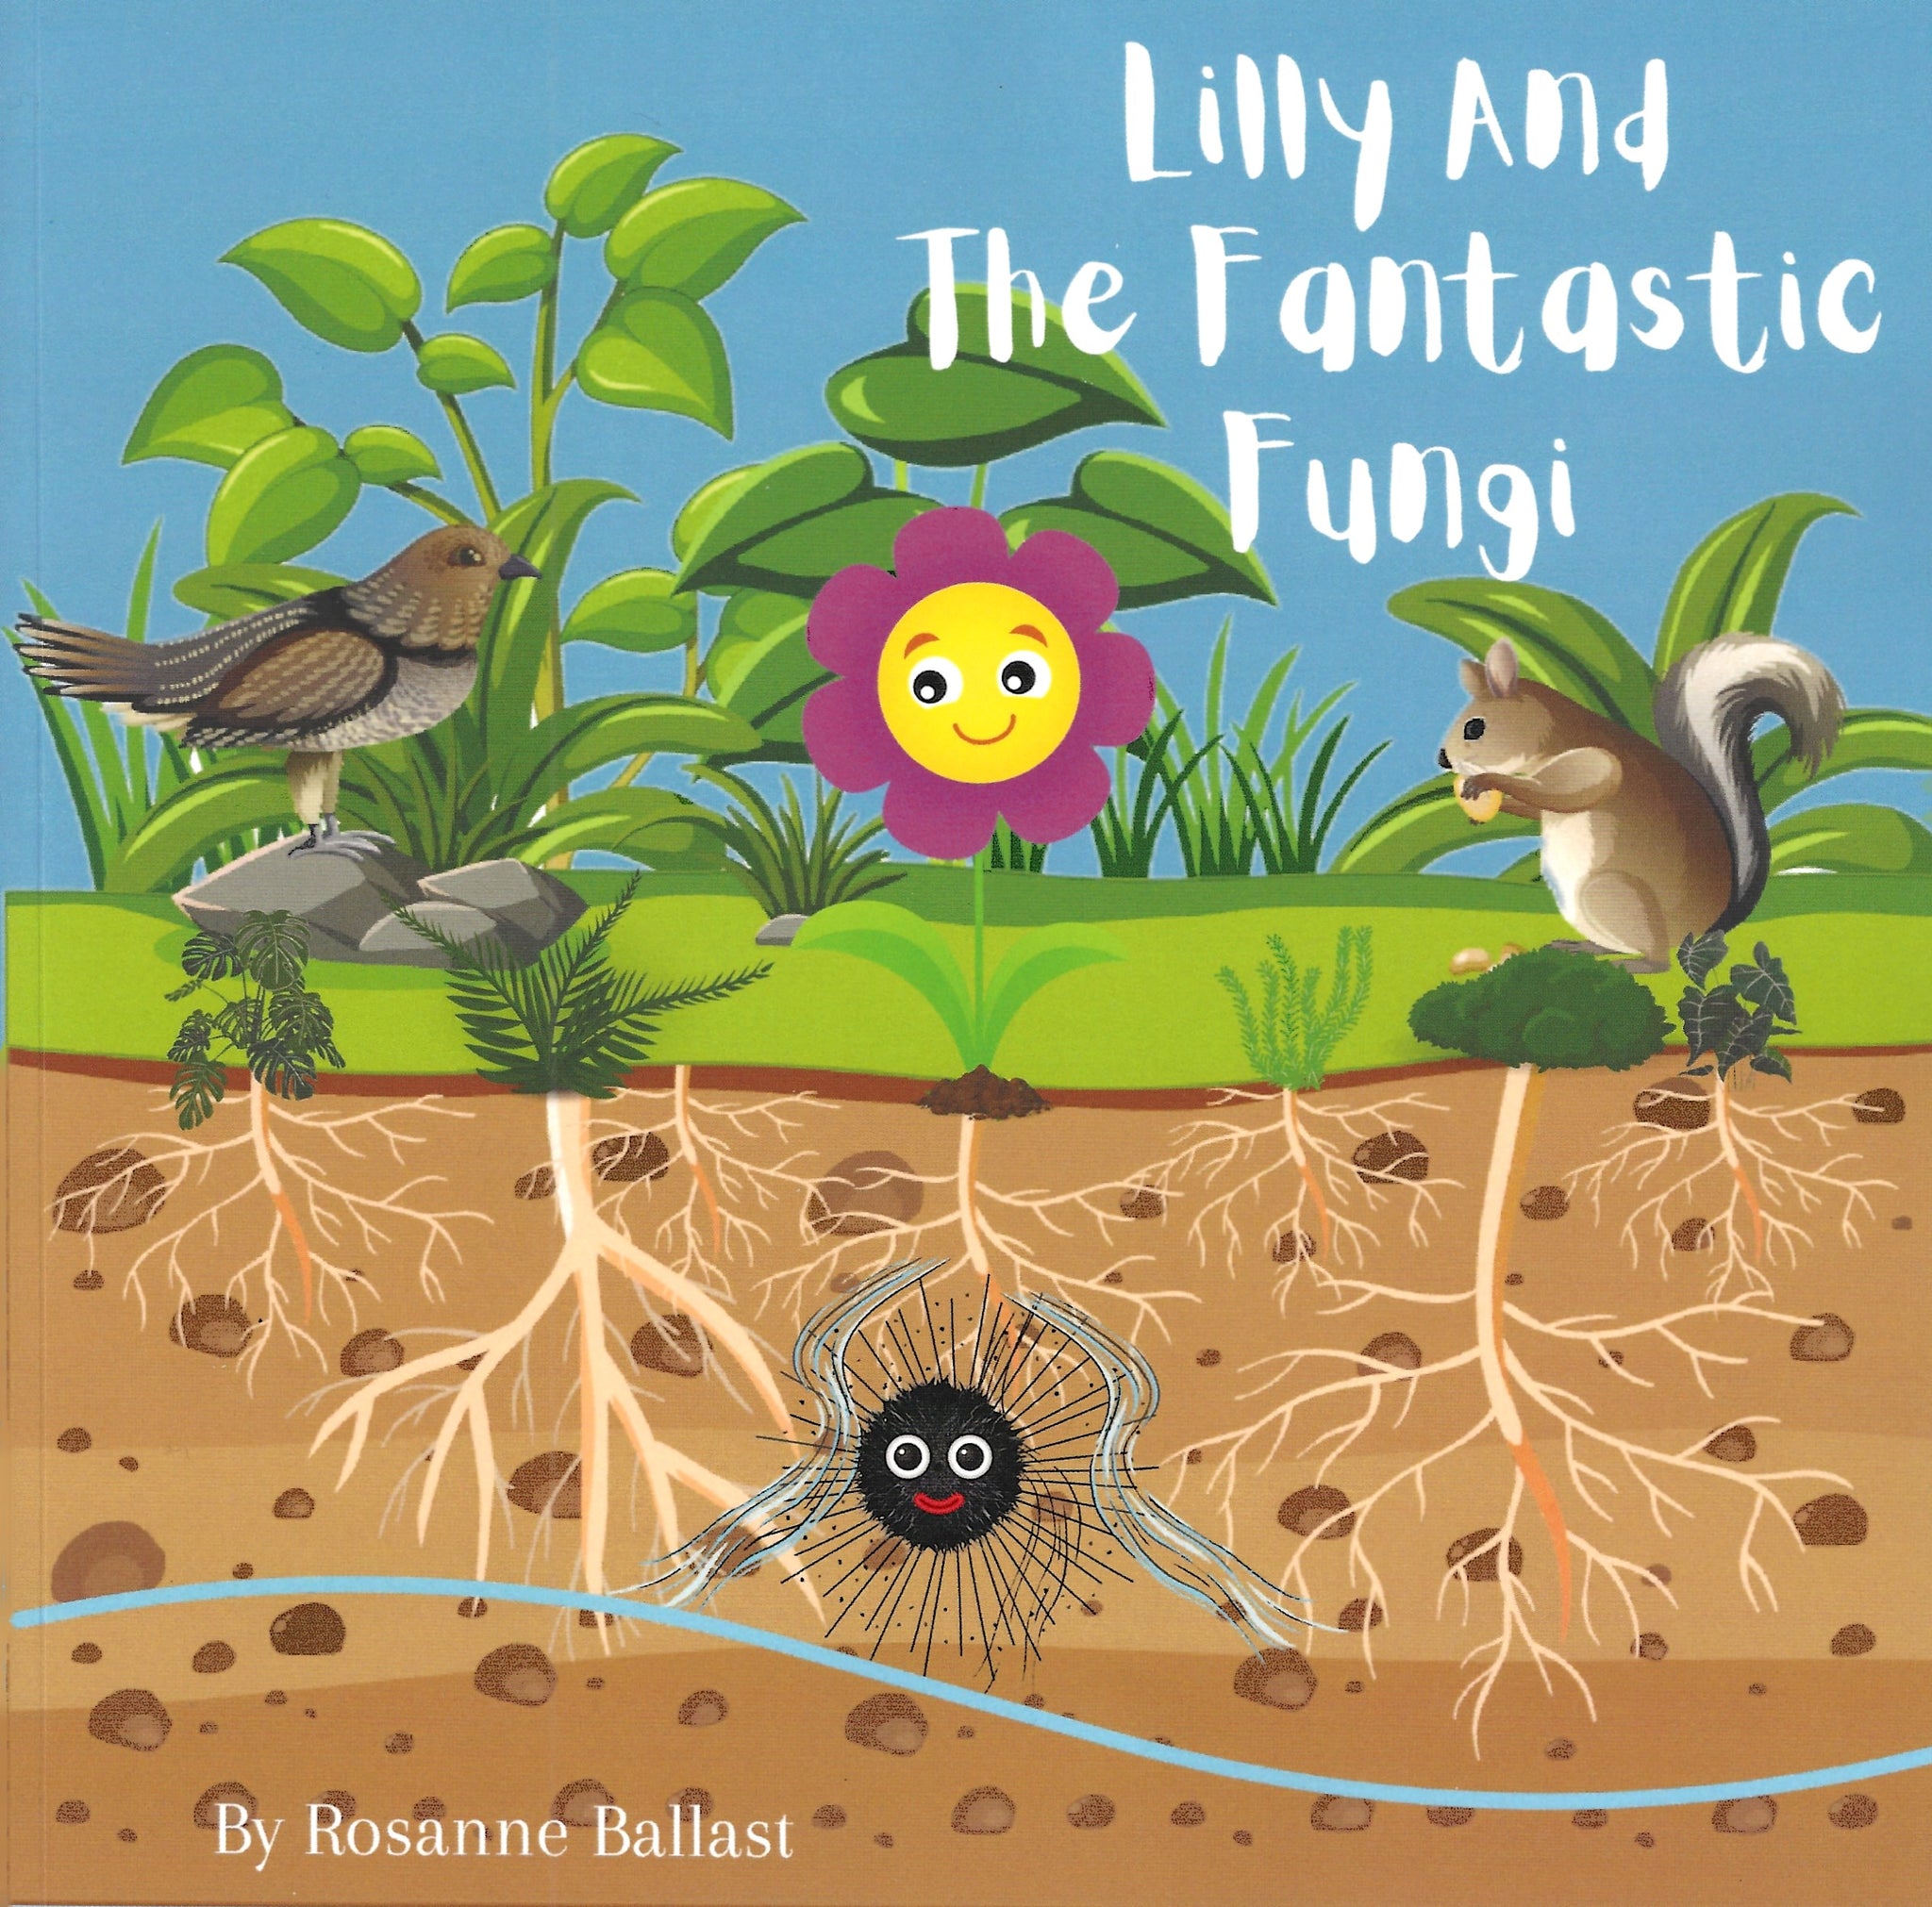 Lilly and the Fantastic Fungi (by Rosanne Ballast)